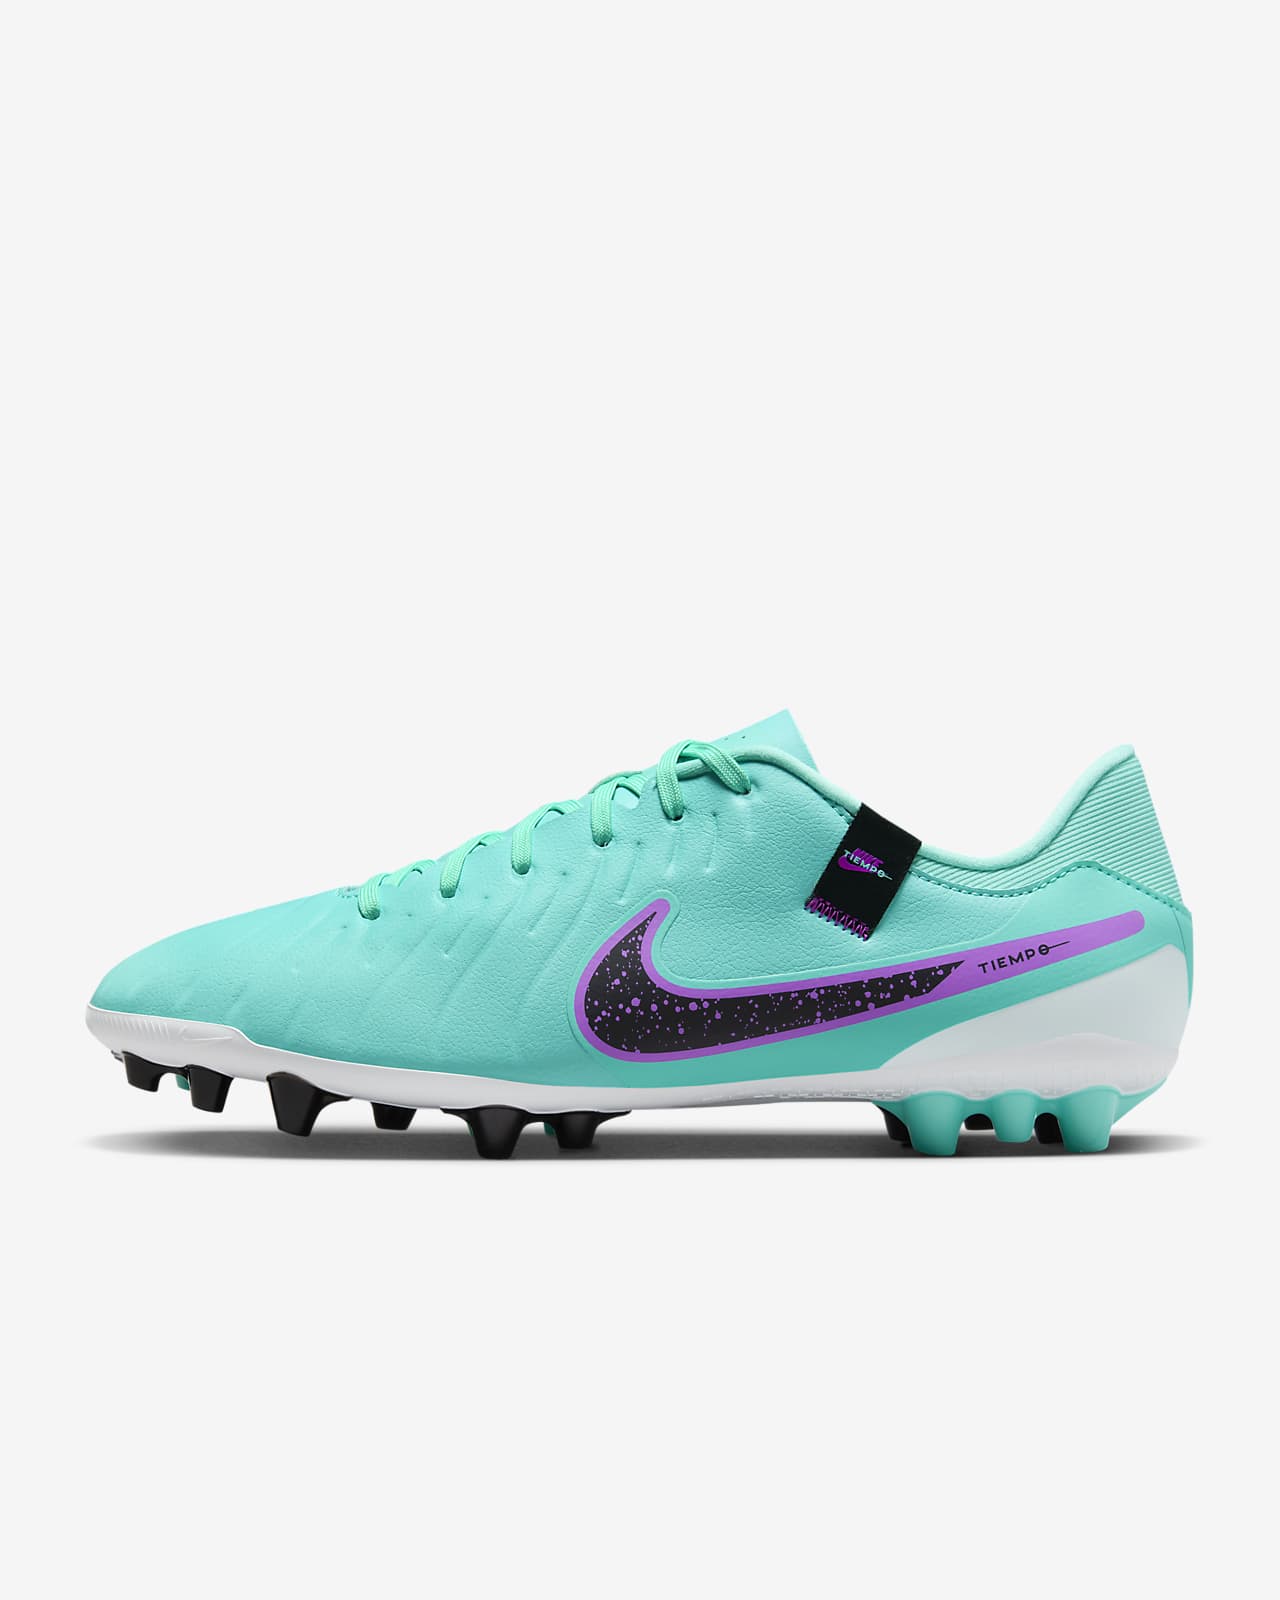 Nike Tiempo Legend 10 Academy Artificial-Grass Low-Top Soccer Cleats